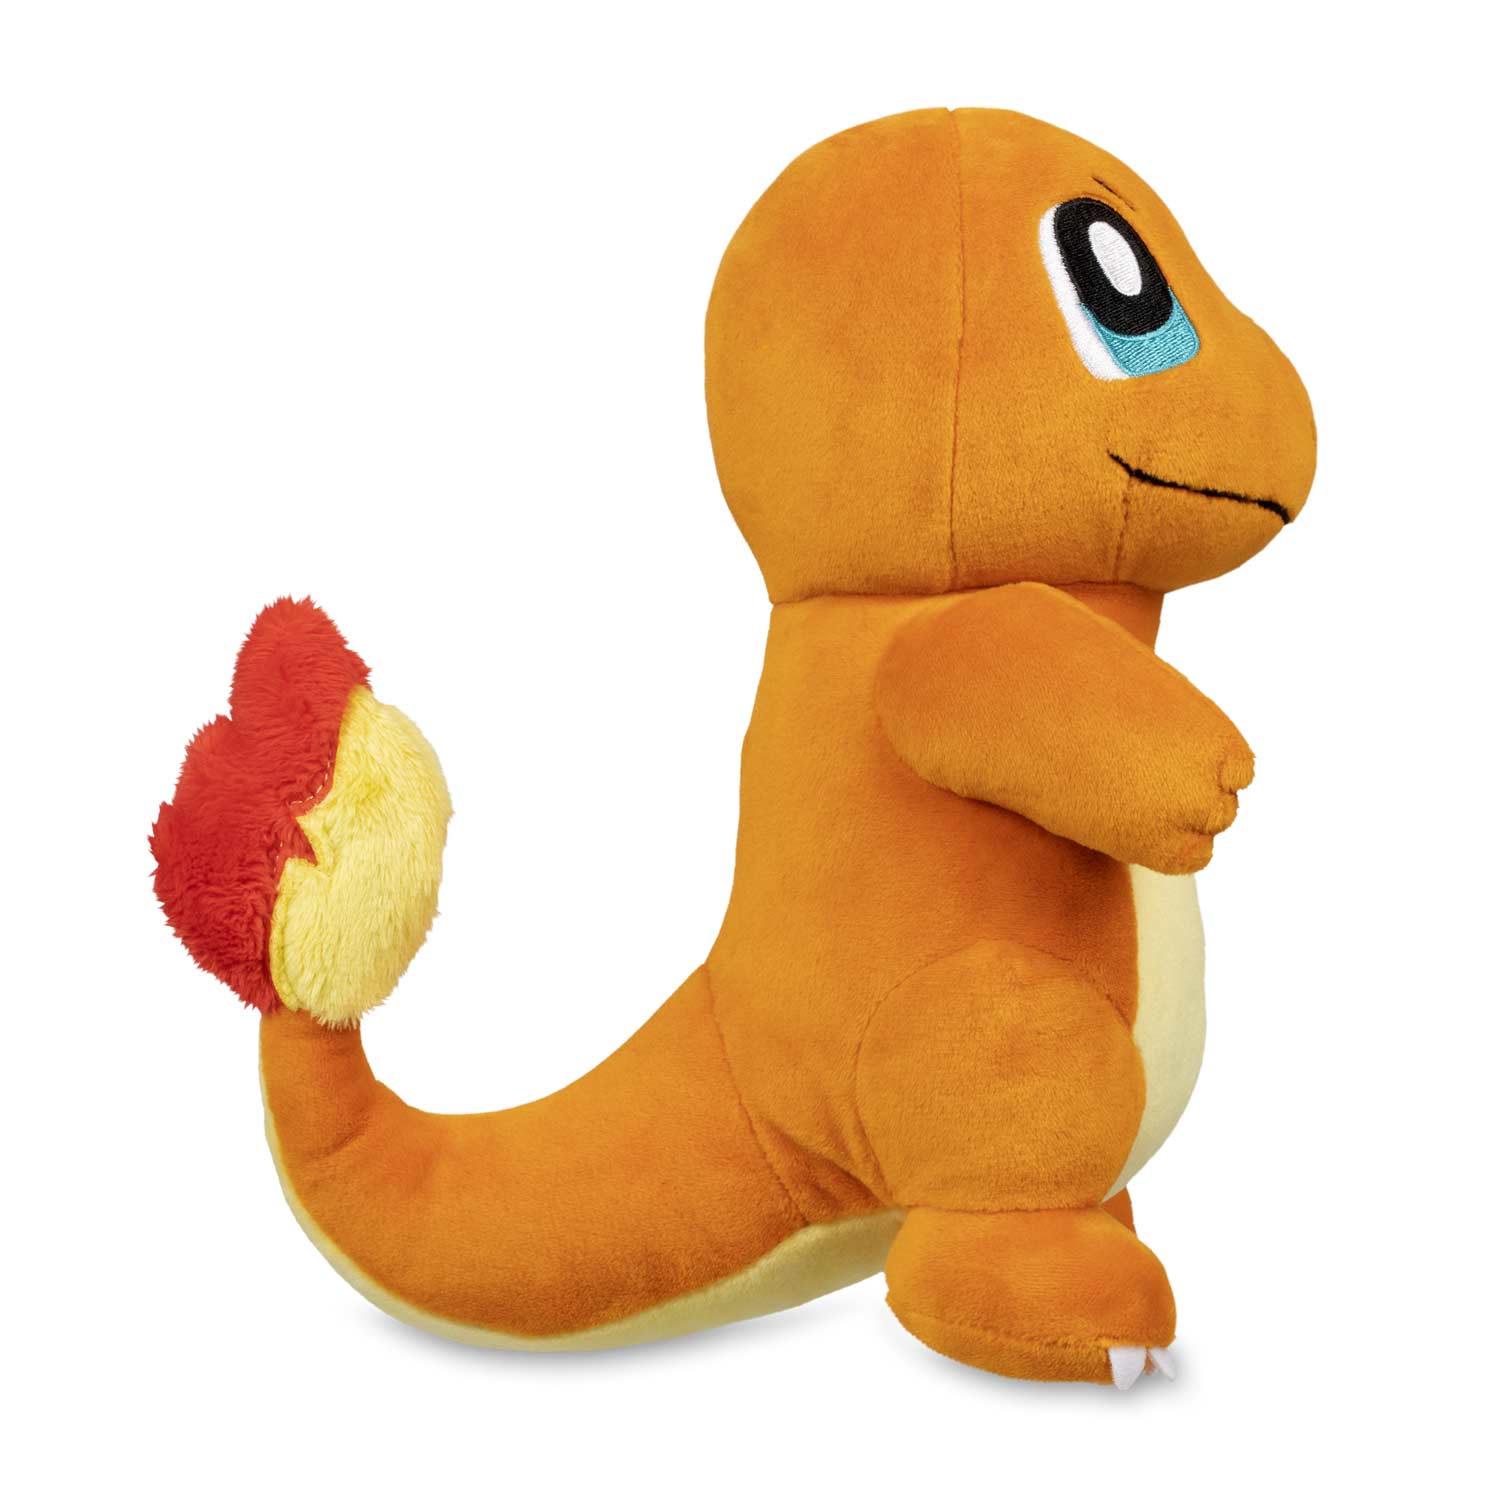 LICENSED TOY. NEW GIANT 15" CHARMANDER POKEMON STUFFED ANIMAL.FIRM STUFFING 